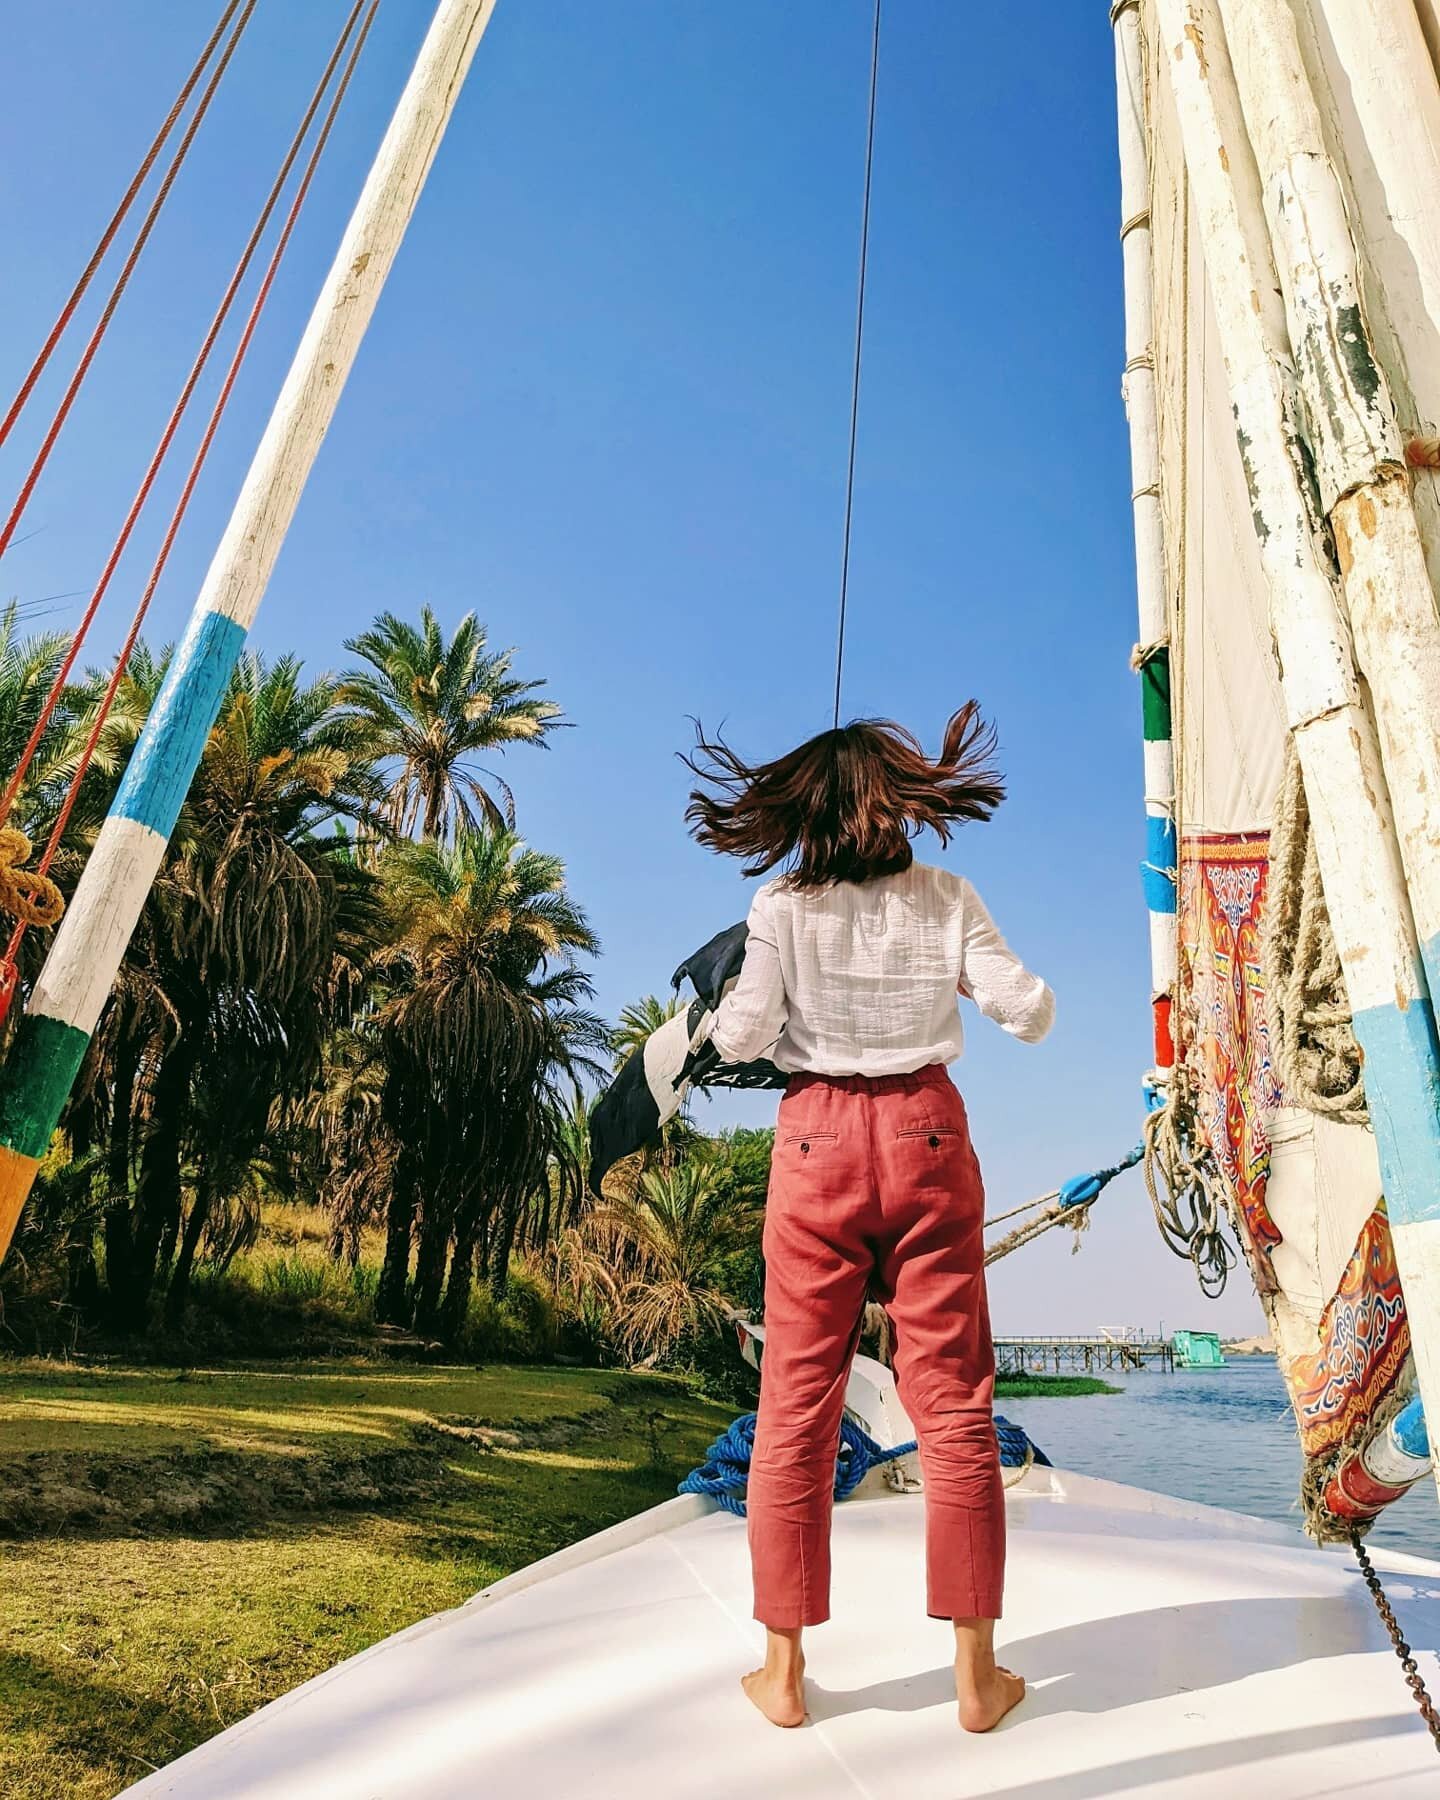 Vibes on the Nile. Swipe left for Laura's and @ryebreadiscovers Libyan Reggae dance moves. Happy Friday everyone! 😉

+++++

Once in your life, sail down the Nile on a traditional Egyptian felucca sailboat!

You spend your day relaxing on a large mat